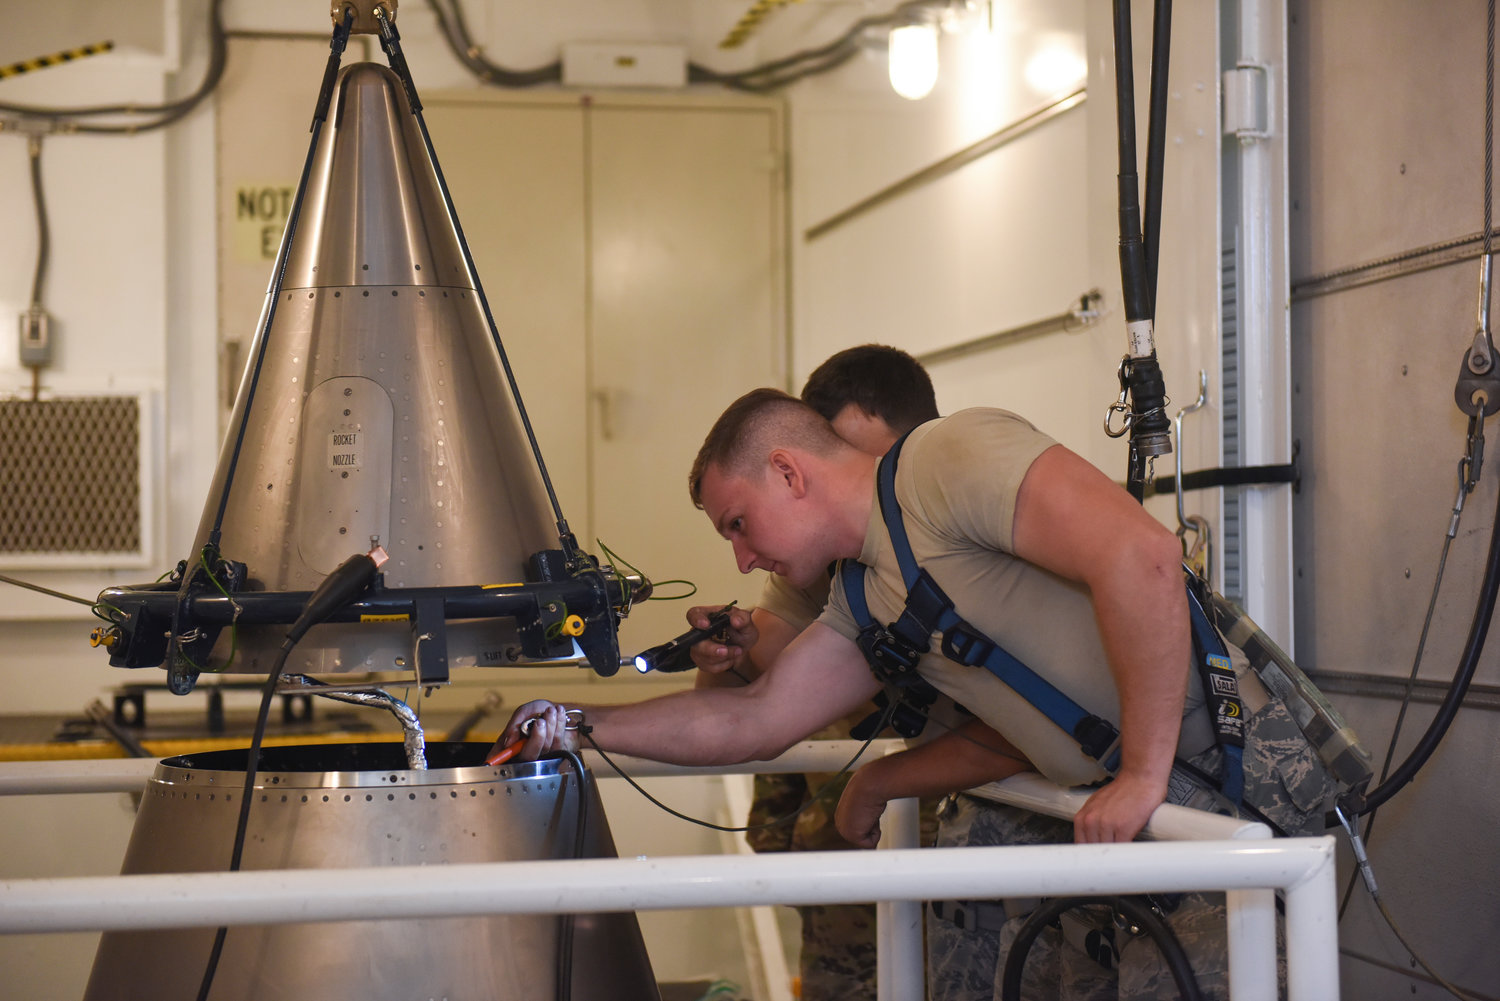 In this image provided by the U.S. Air Force, Senior Airmen Andrew Whitener and Tyler Glodgett 341st Missile Maintenance Squadron topsiders, inspect the cable connections of an intercontinental ballistic missile during a Simulated Electronic Launch-Minuteman test Sept. 22, 2020, at a launch facility near Great Falls, Mont.